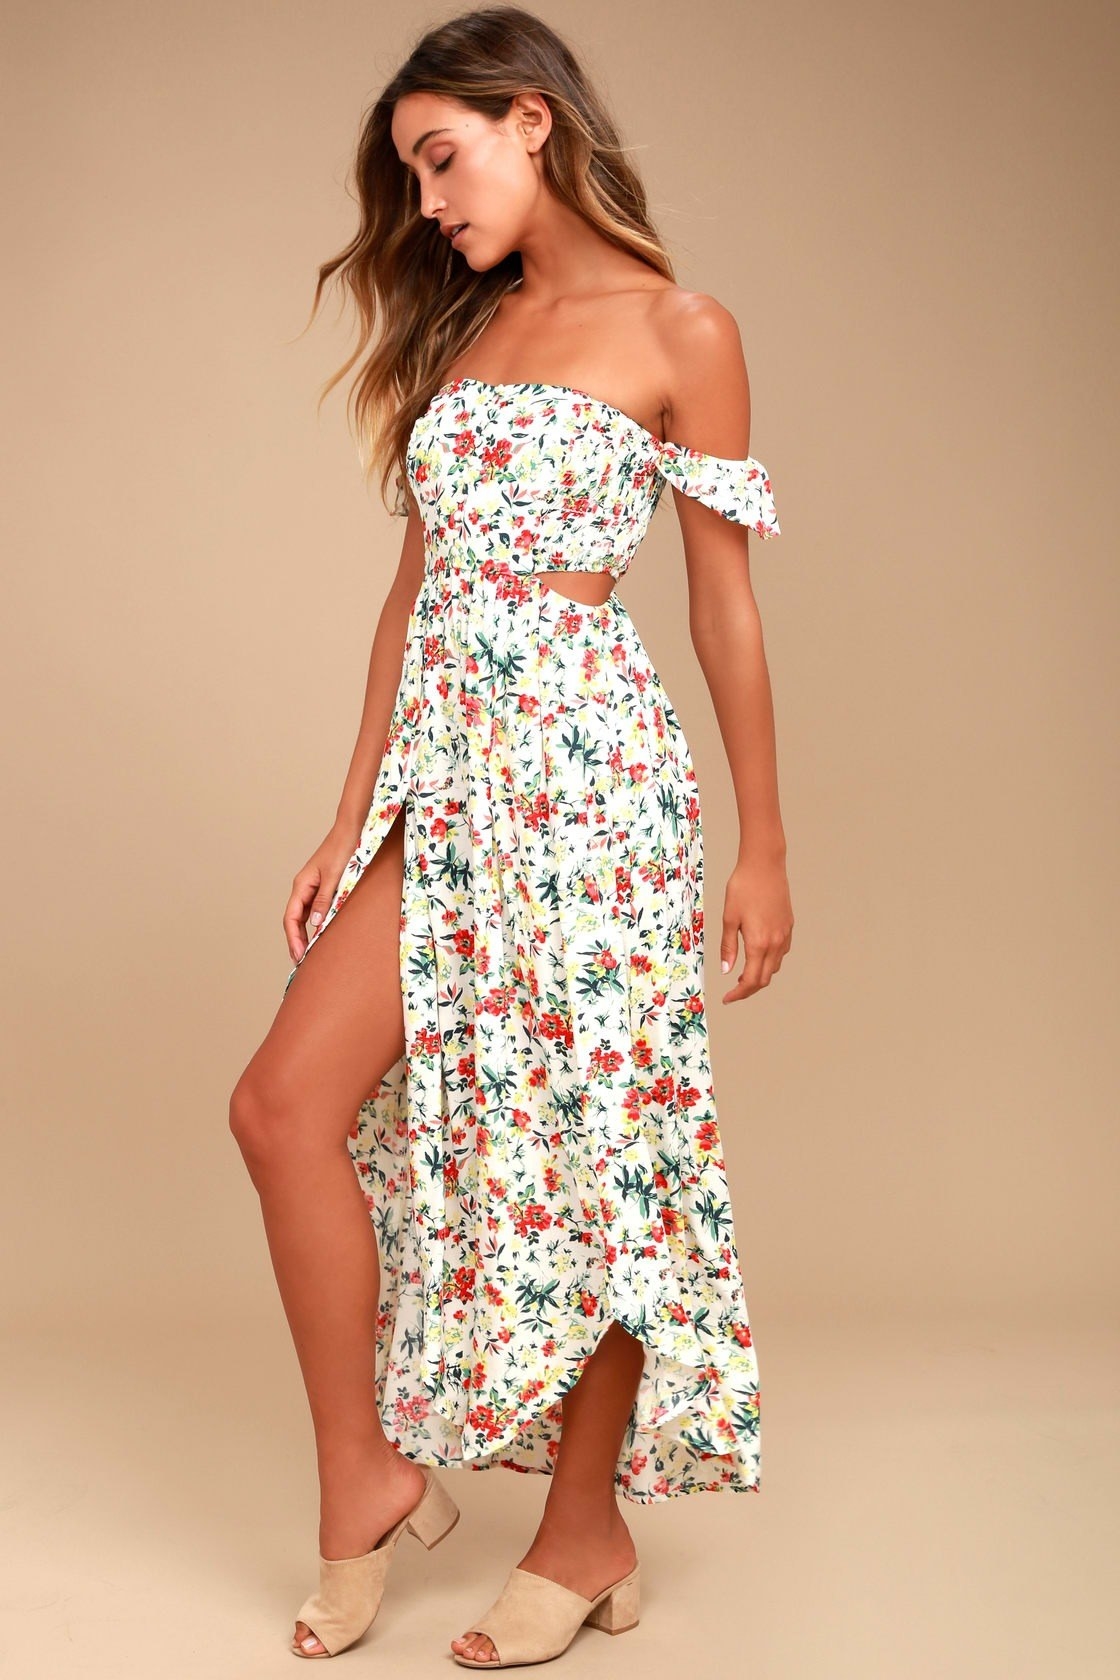 Model wearing white floral maxi cut-out dress